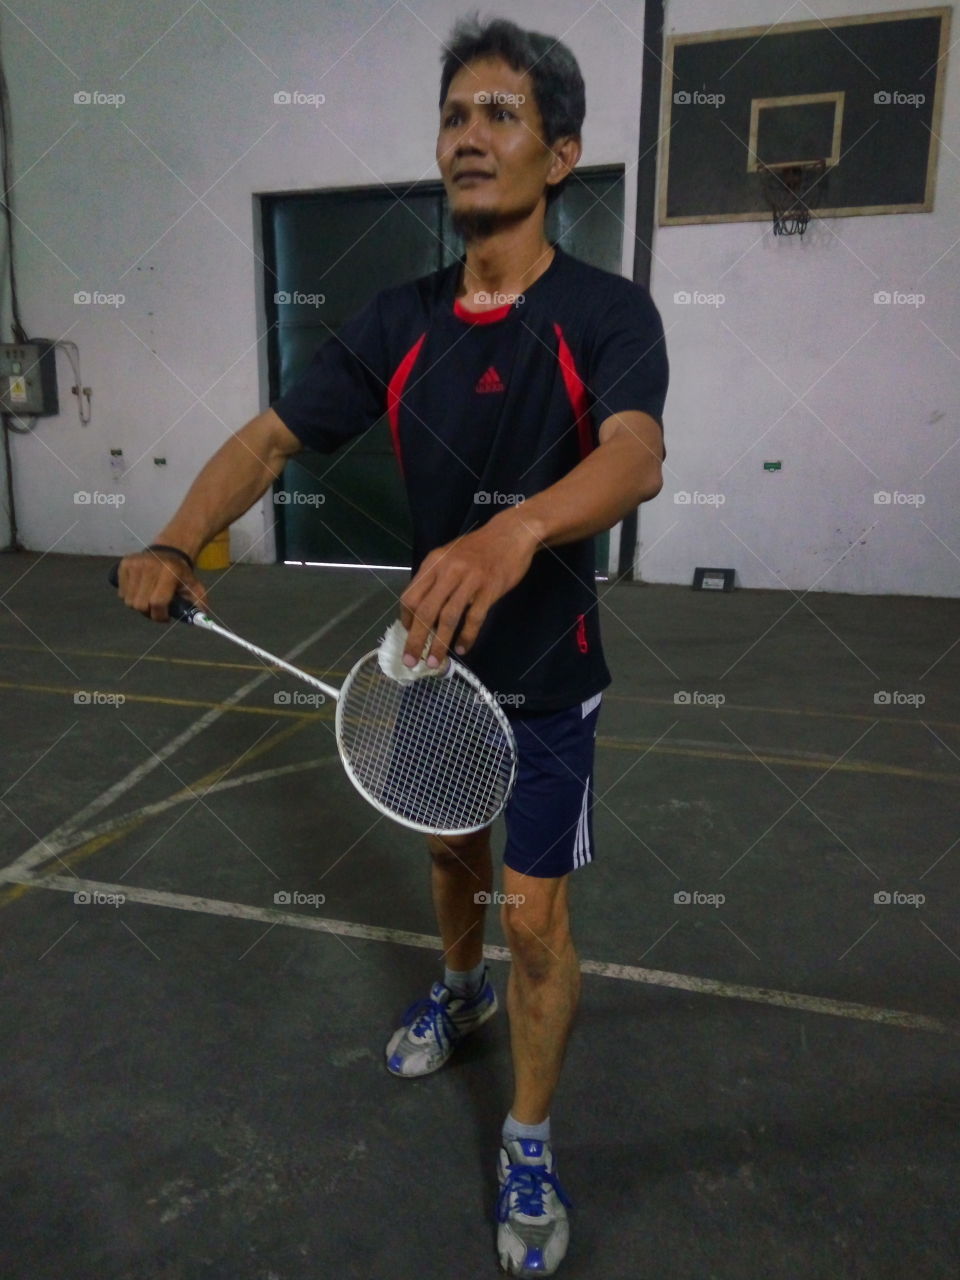 staying in good shape - ' Badminton '